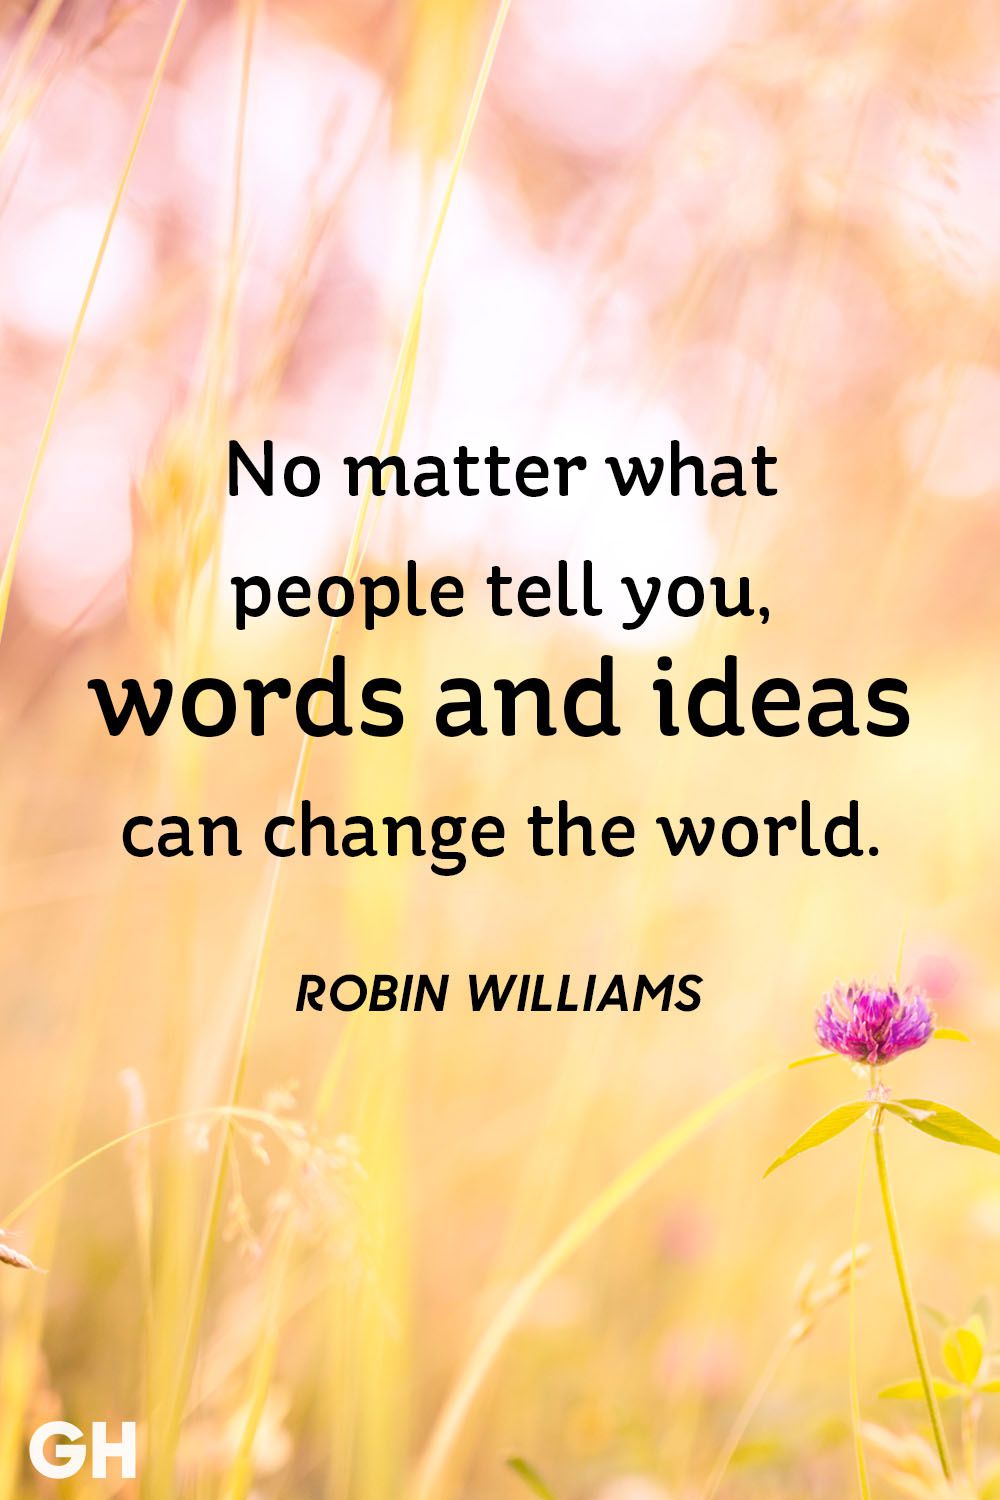 No matter what people tell you, words and ideas can change the world. Robin williams